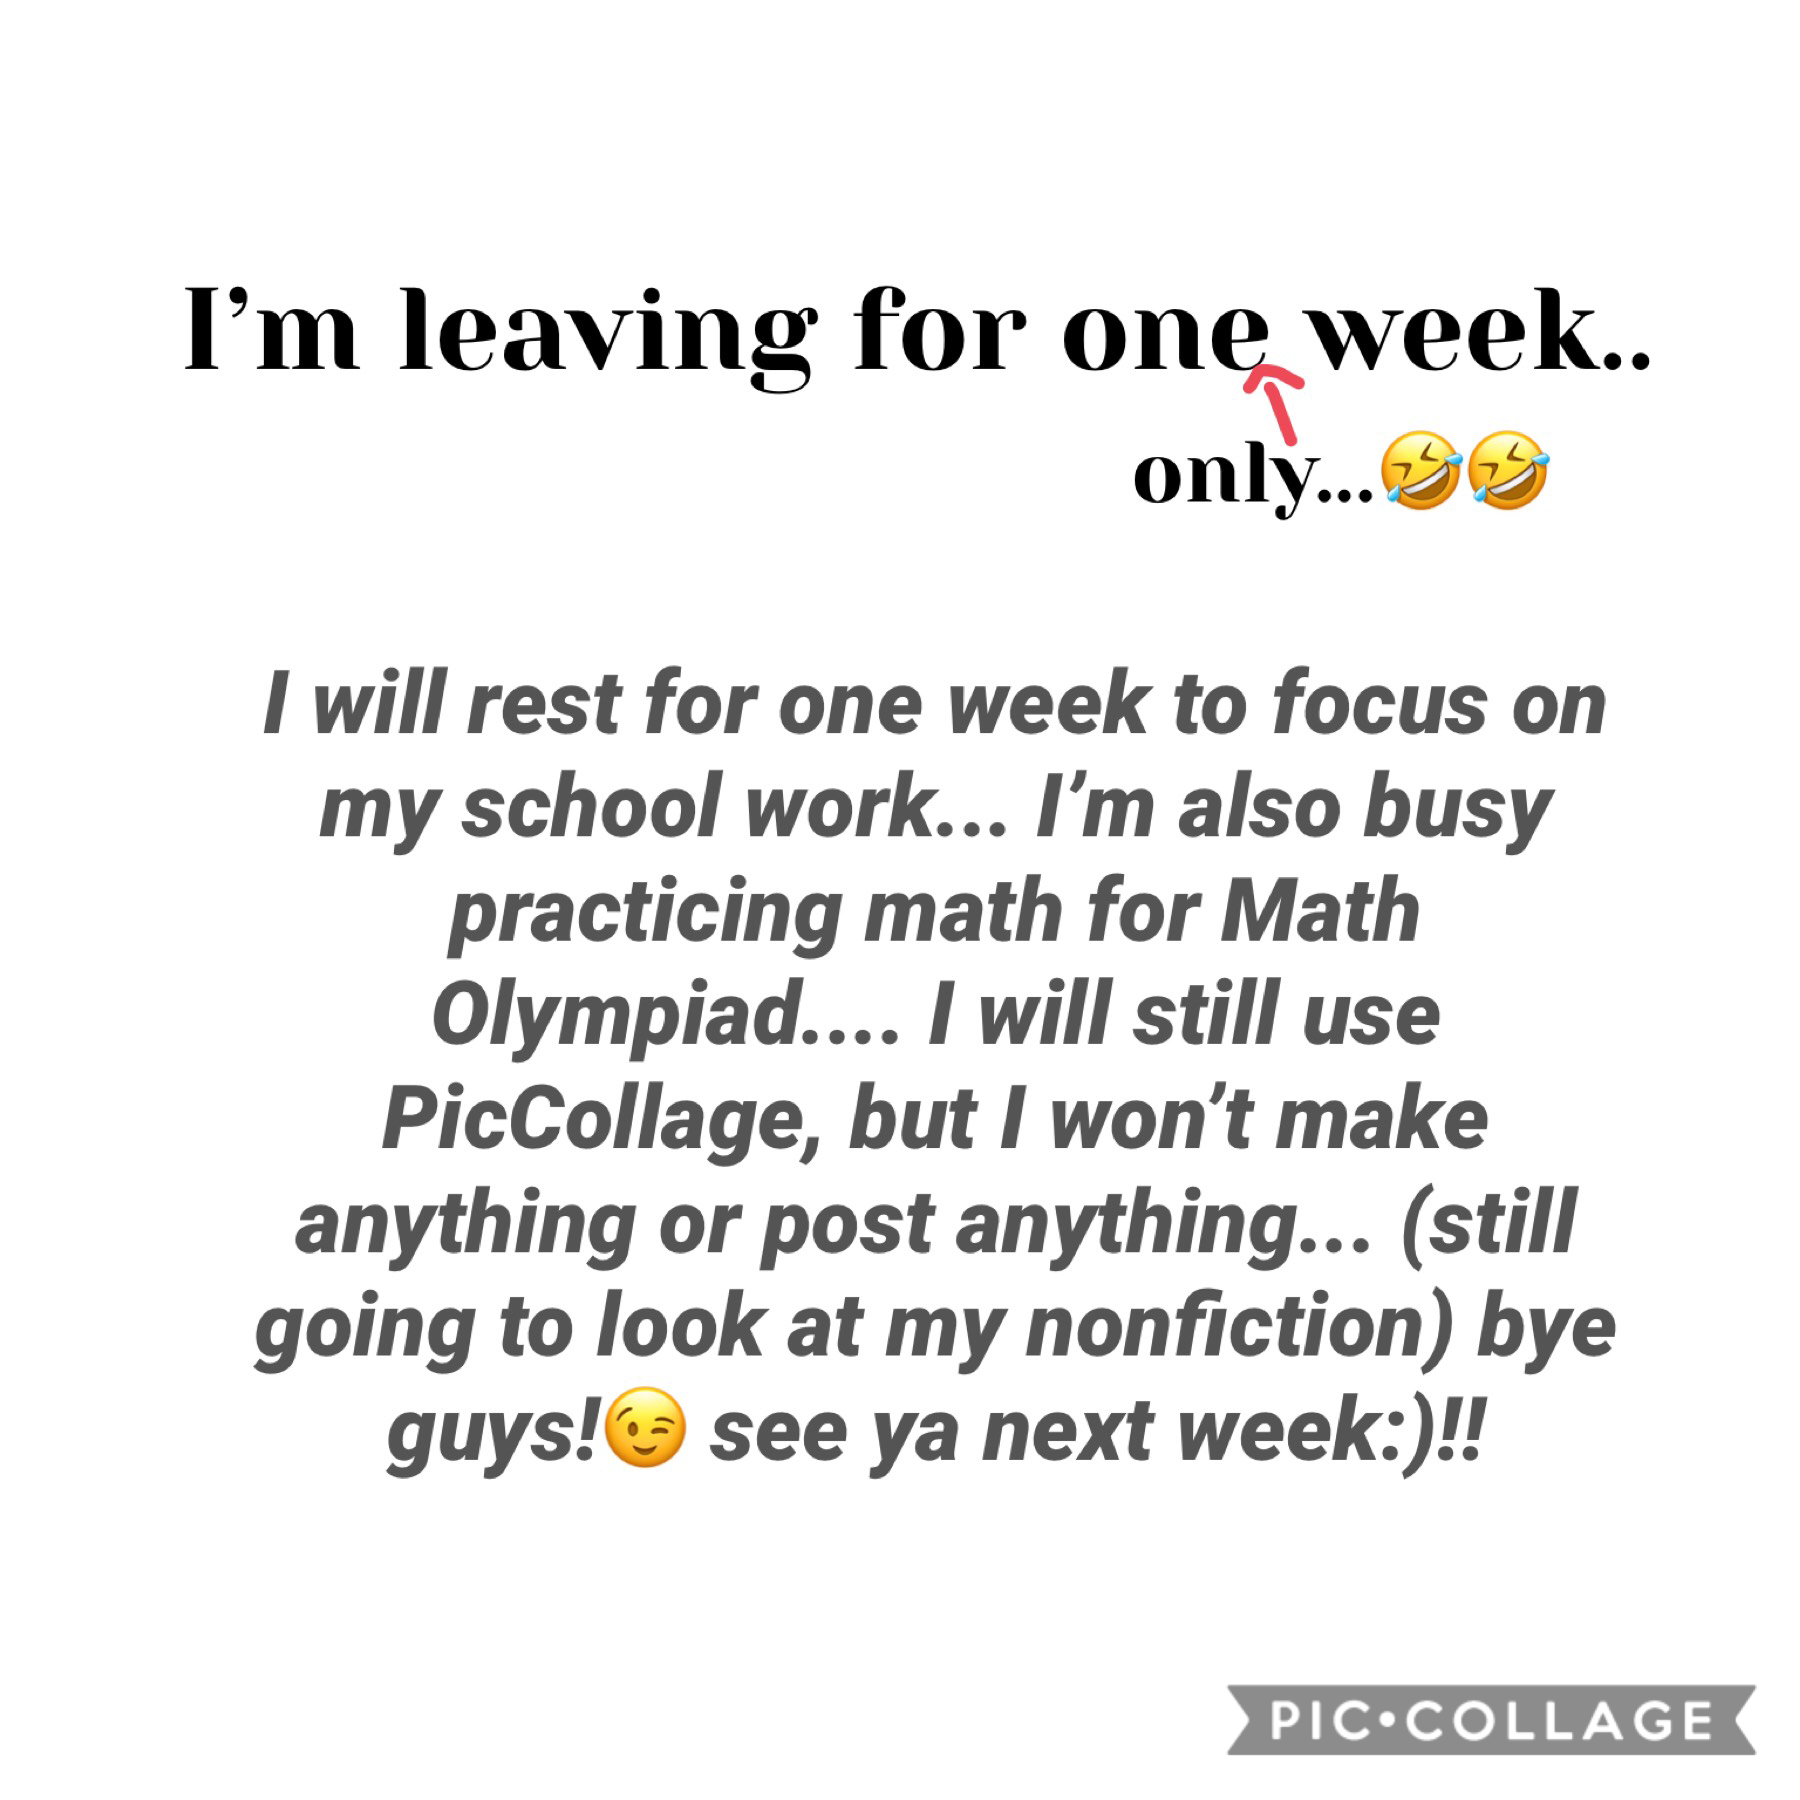 TAP

BYE I’M LEAVING FOR ONE WEEK!! 👋 